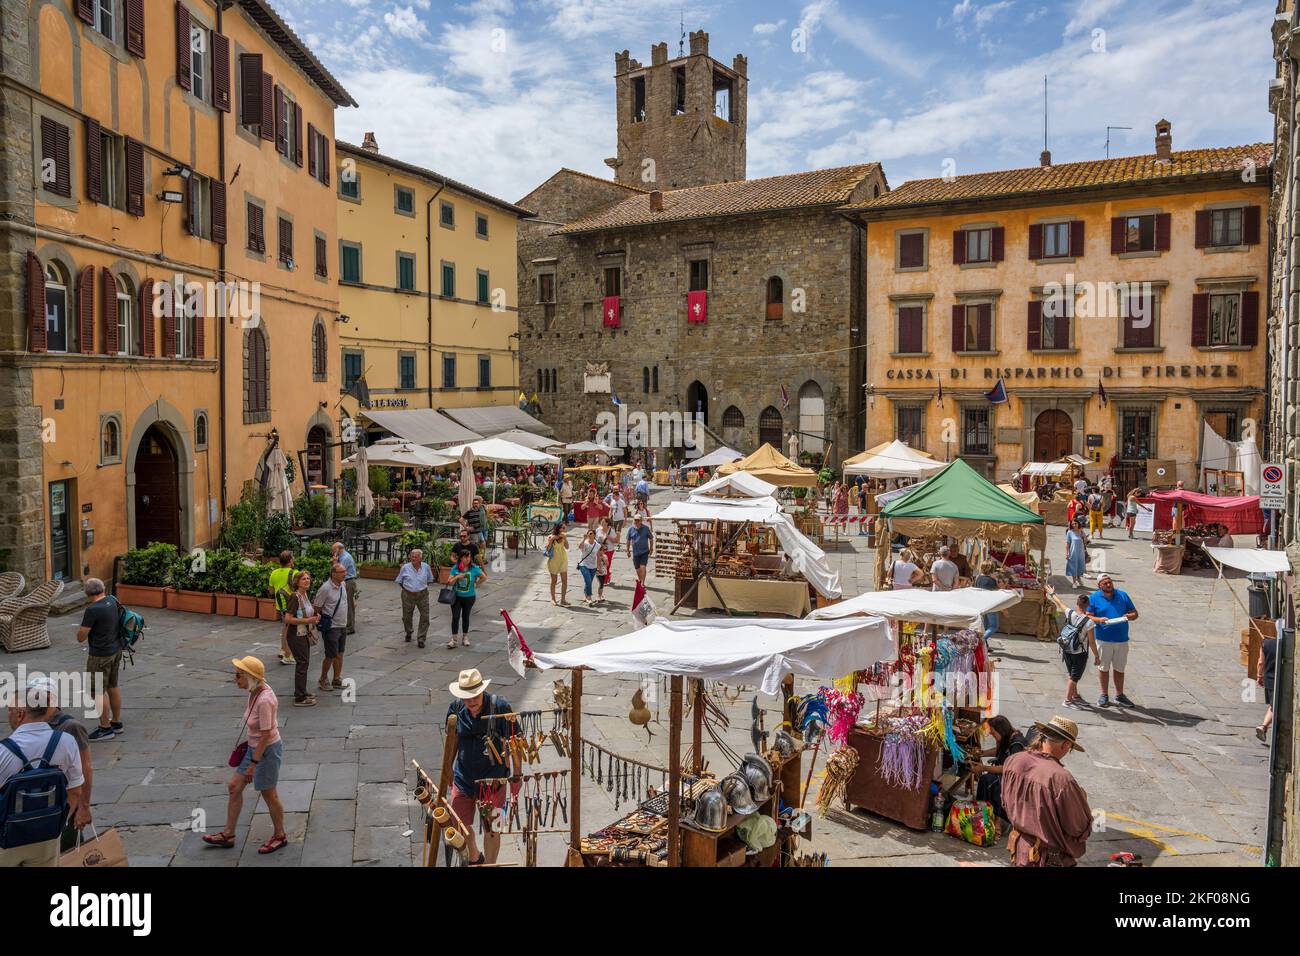 Market stalls in Piazza Luca Signorelli with Chiesa Evangelica 'dei Fratelli' in background in hilltop town of Cortona in Tuscany, Italy Stock Photo